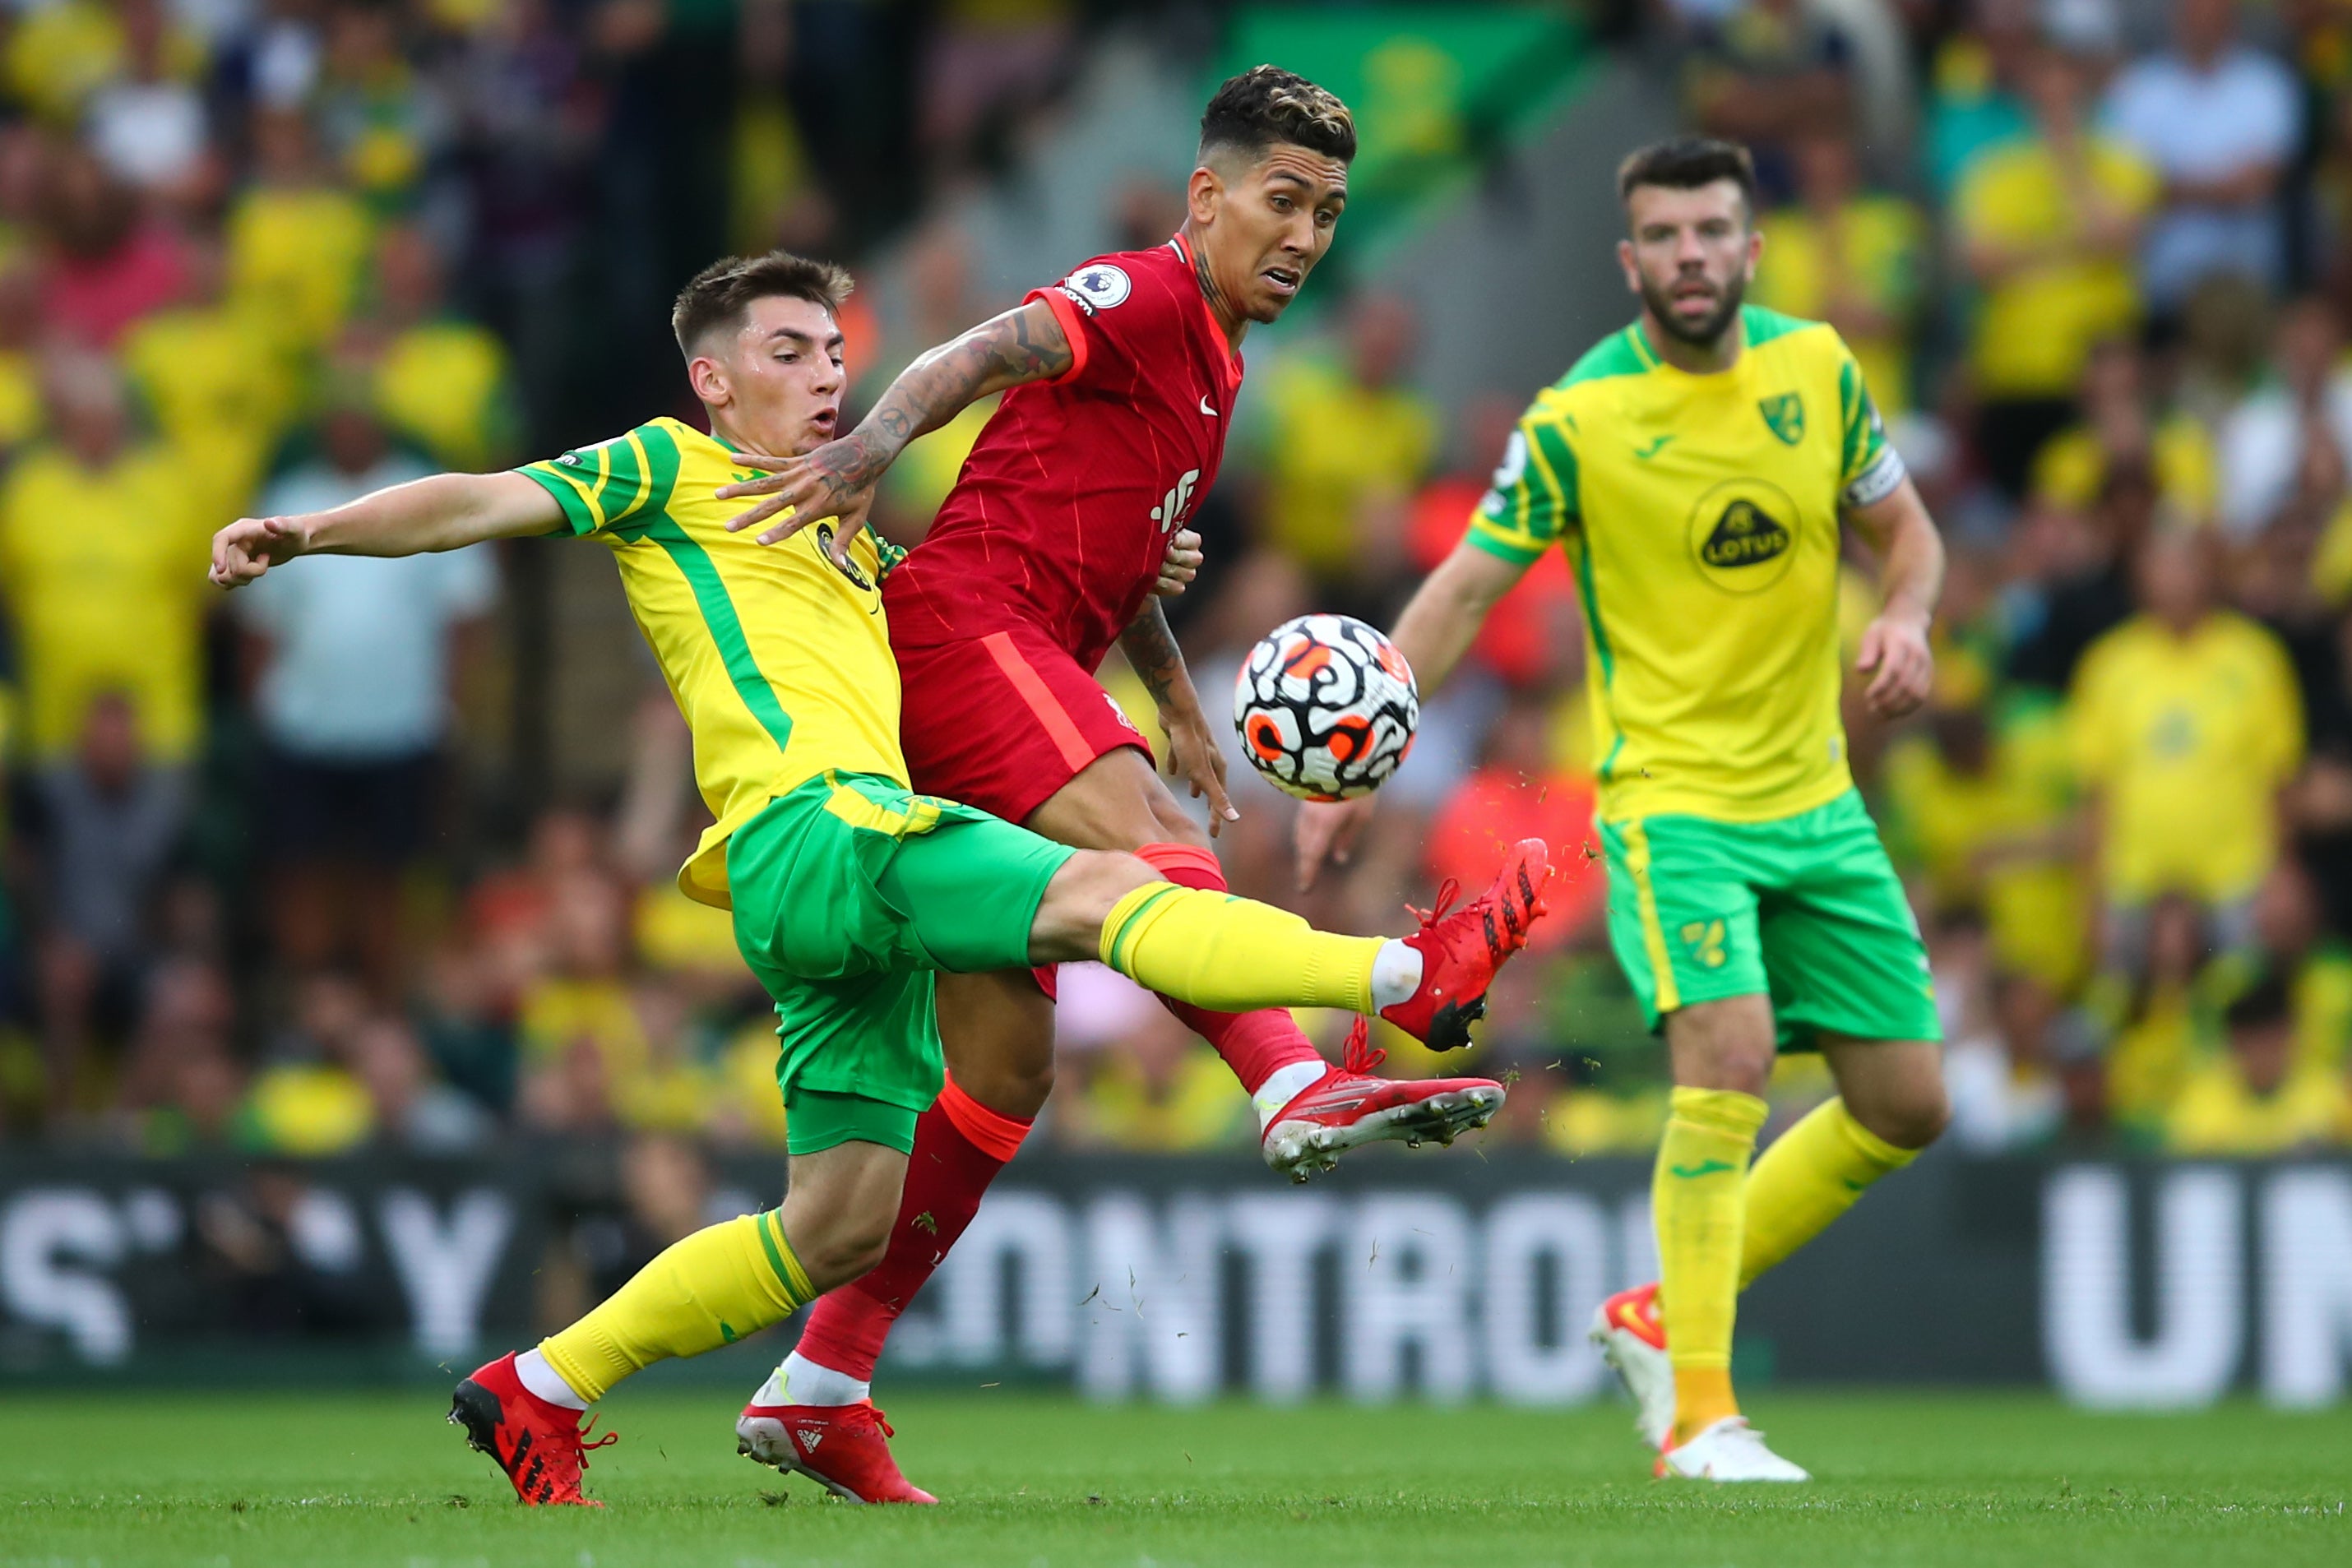 Billy Gilmour was making his debut for Norwich after joining the club on loan from Chelsea